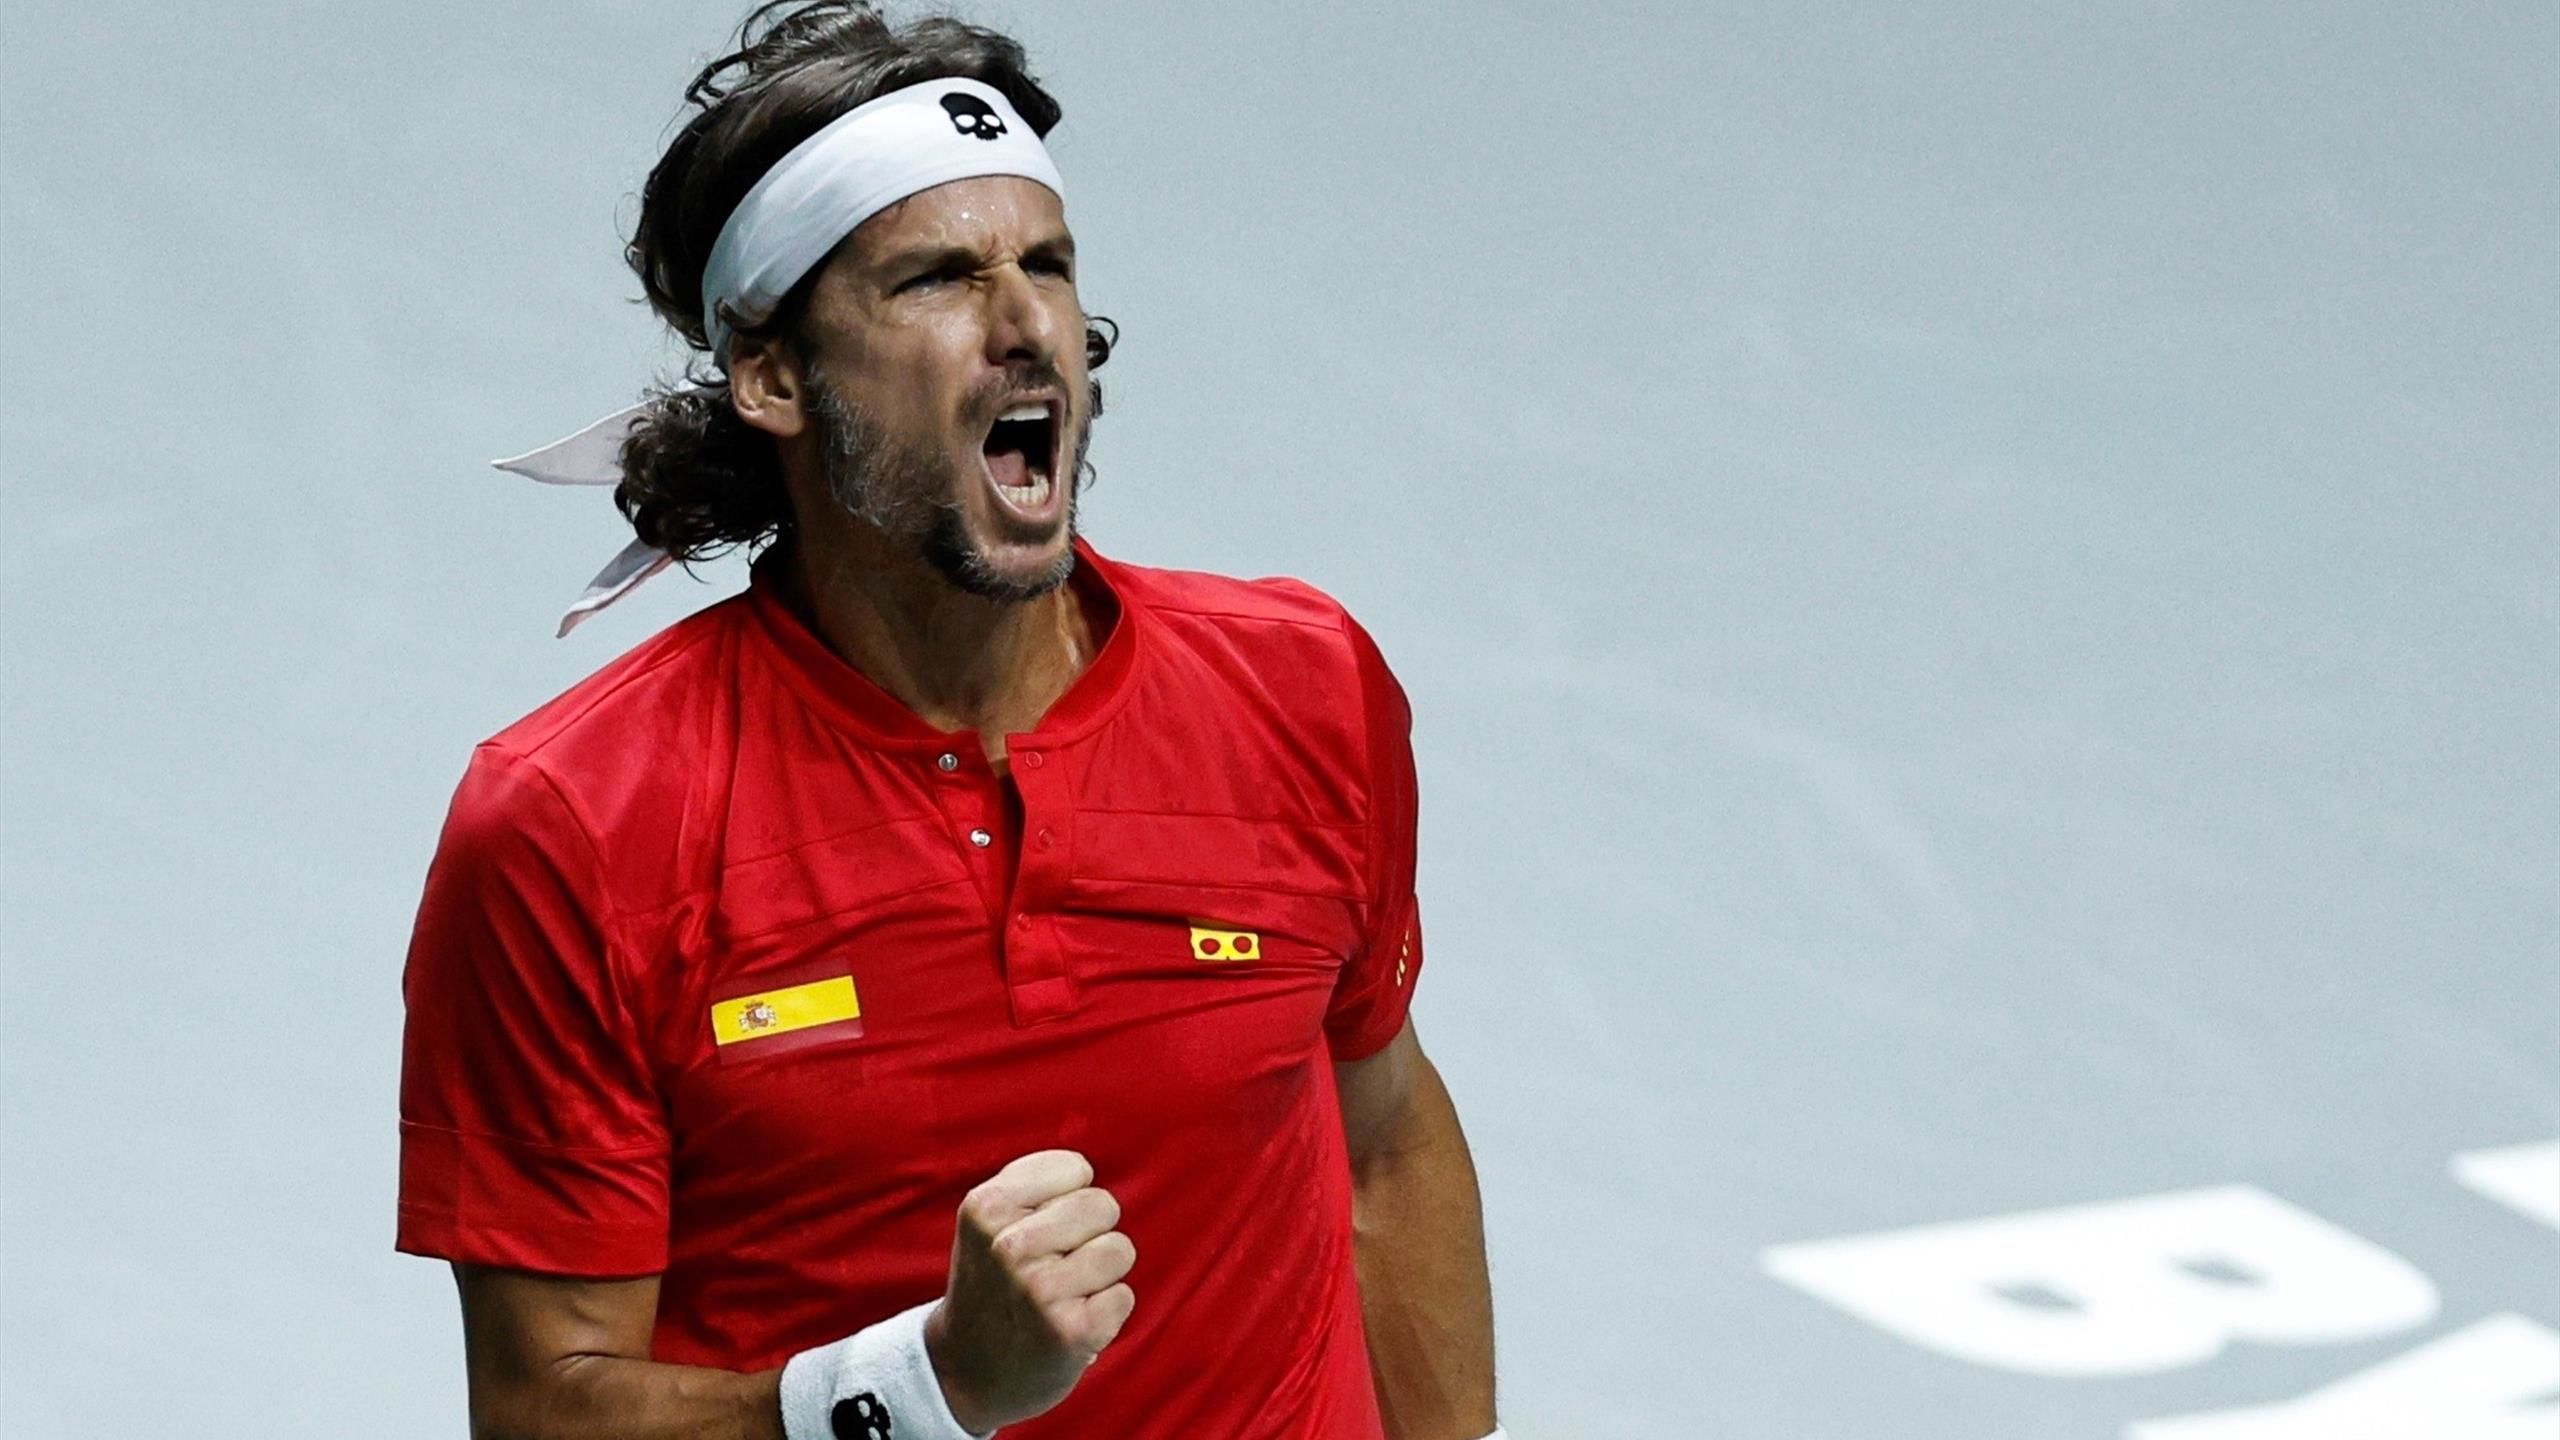 2021 Davis Cup Finals: Spain - Russia Bets and Odds | November 28